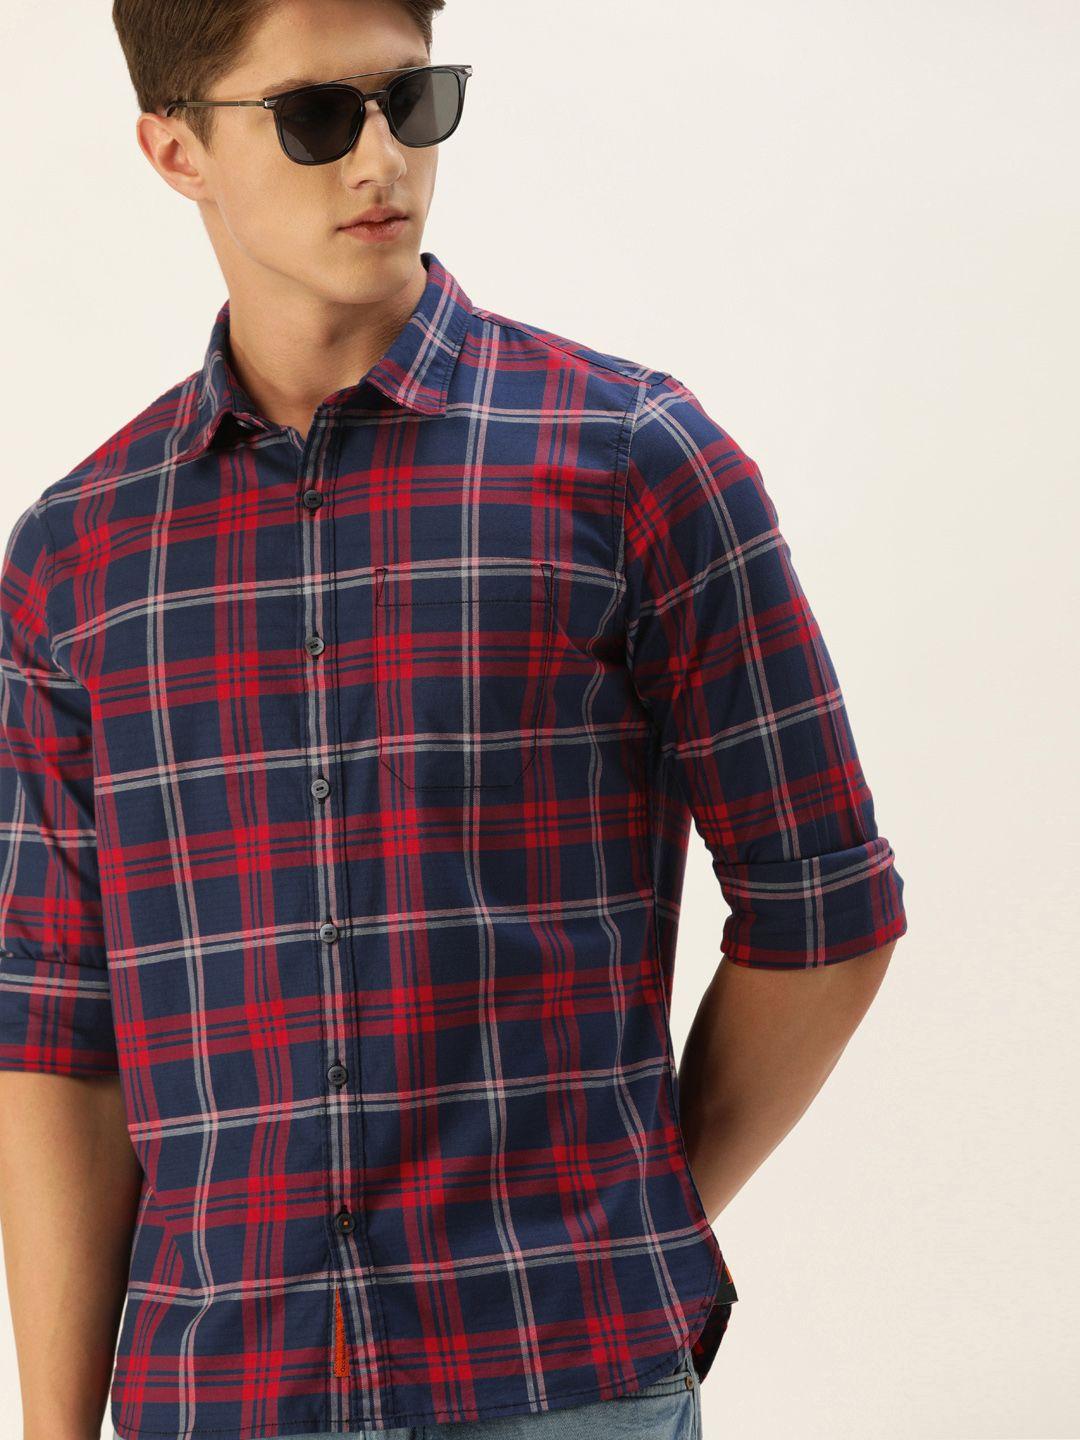 single men navy blue & red slim fit checked casual shirt